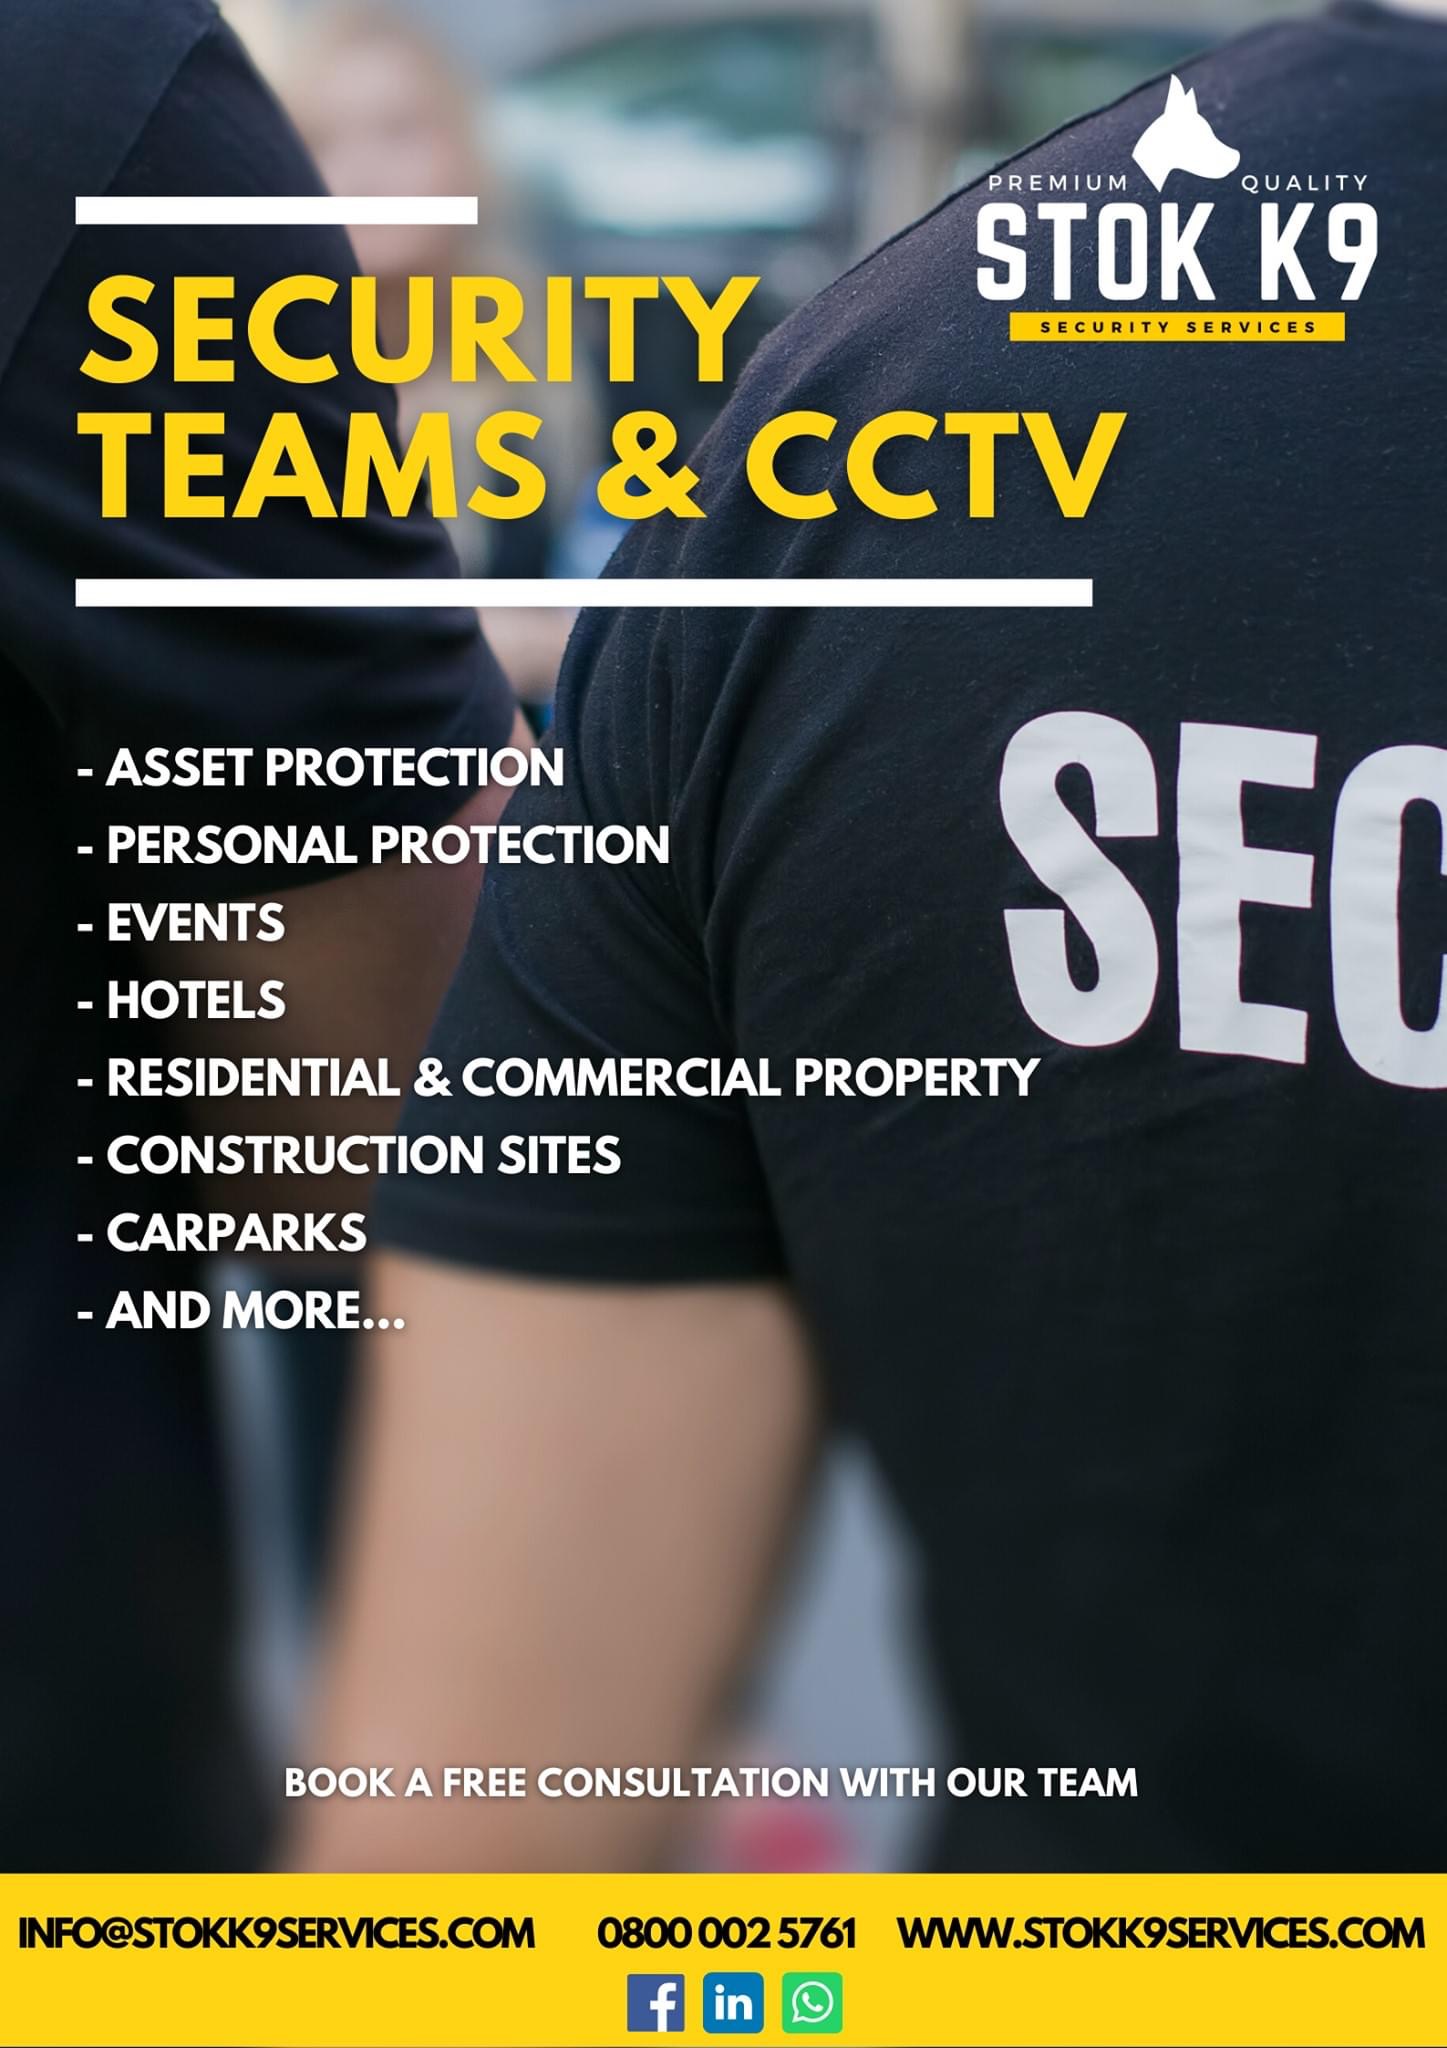 Security Dog Handlers, Hotel CCTV Systems, Manned Guarding for Hotels, Hotel Security Services